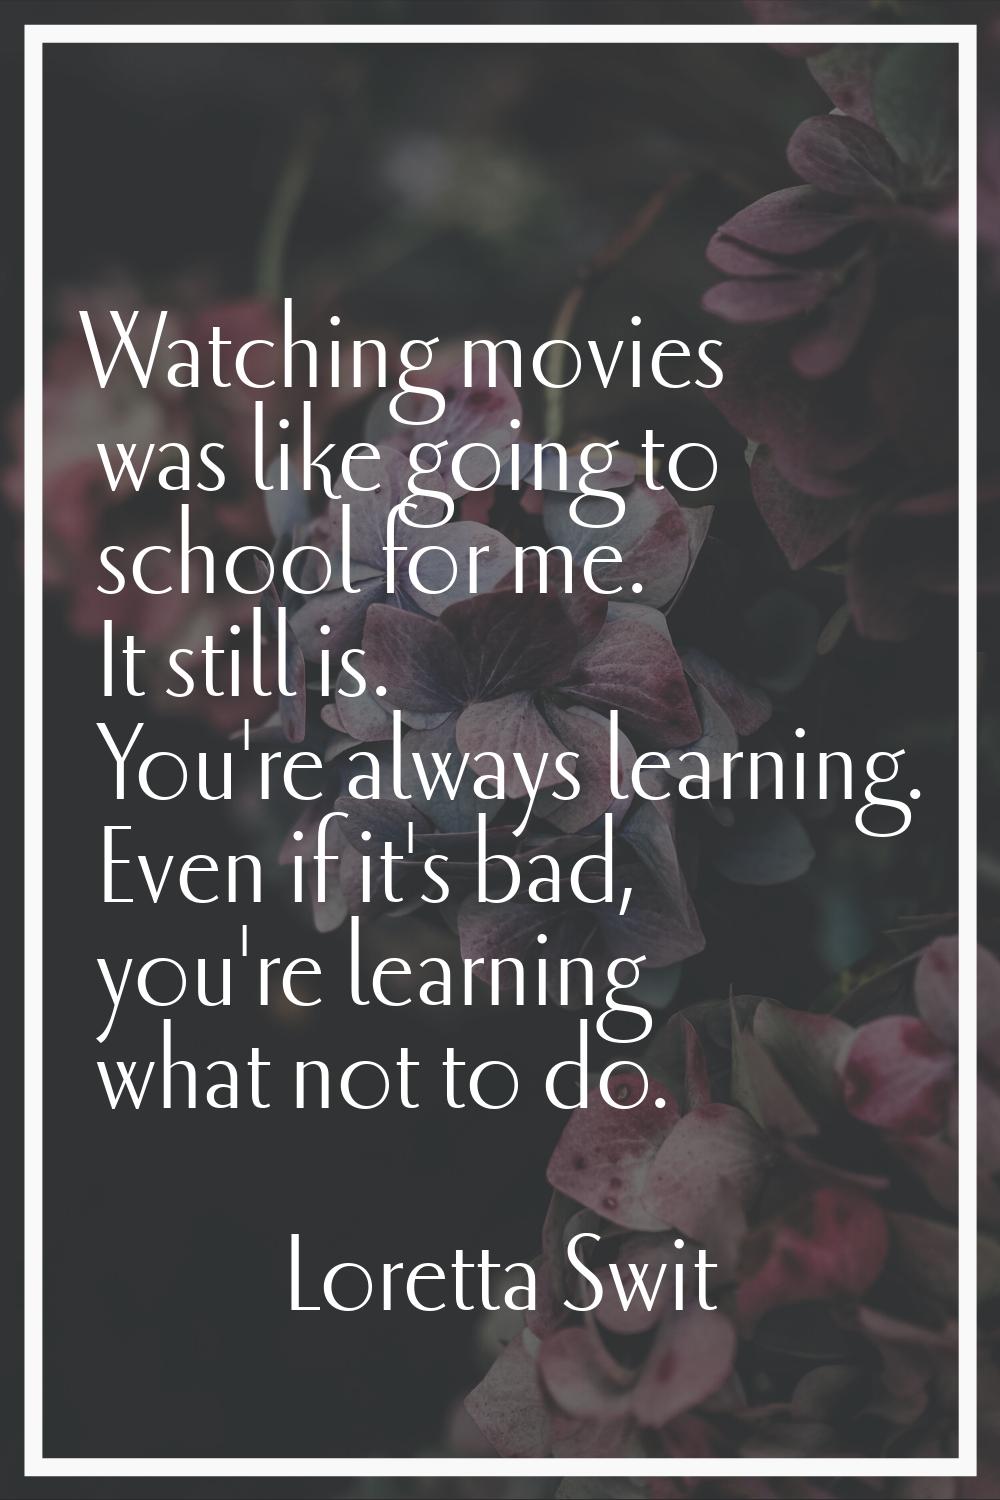 Watching movies was like going to school for me. It still is. You're always learning. Even if it's 